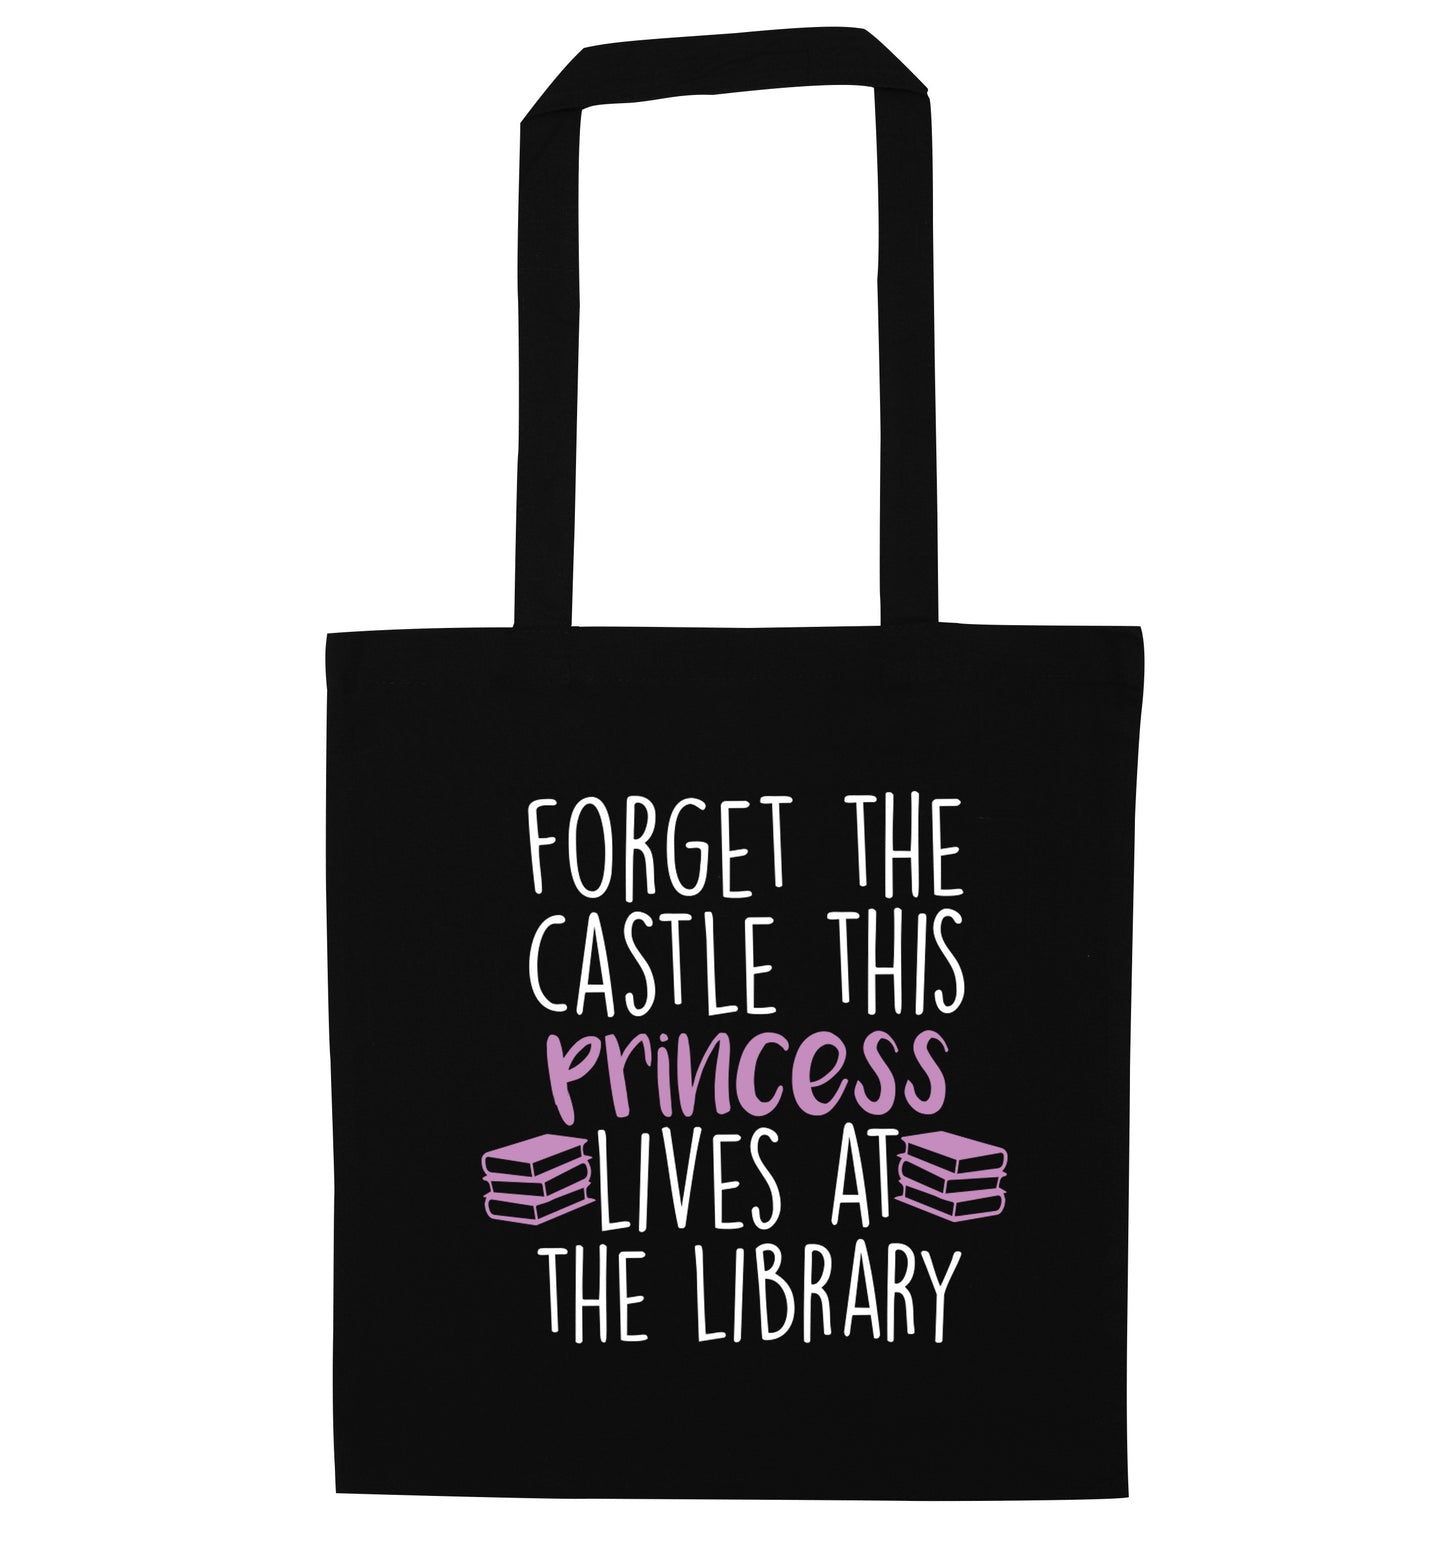 Forget the castle this princess lives at the library black tote bag